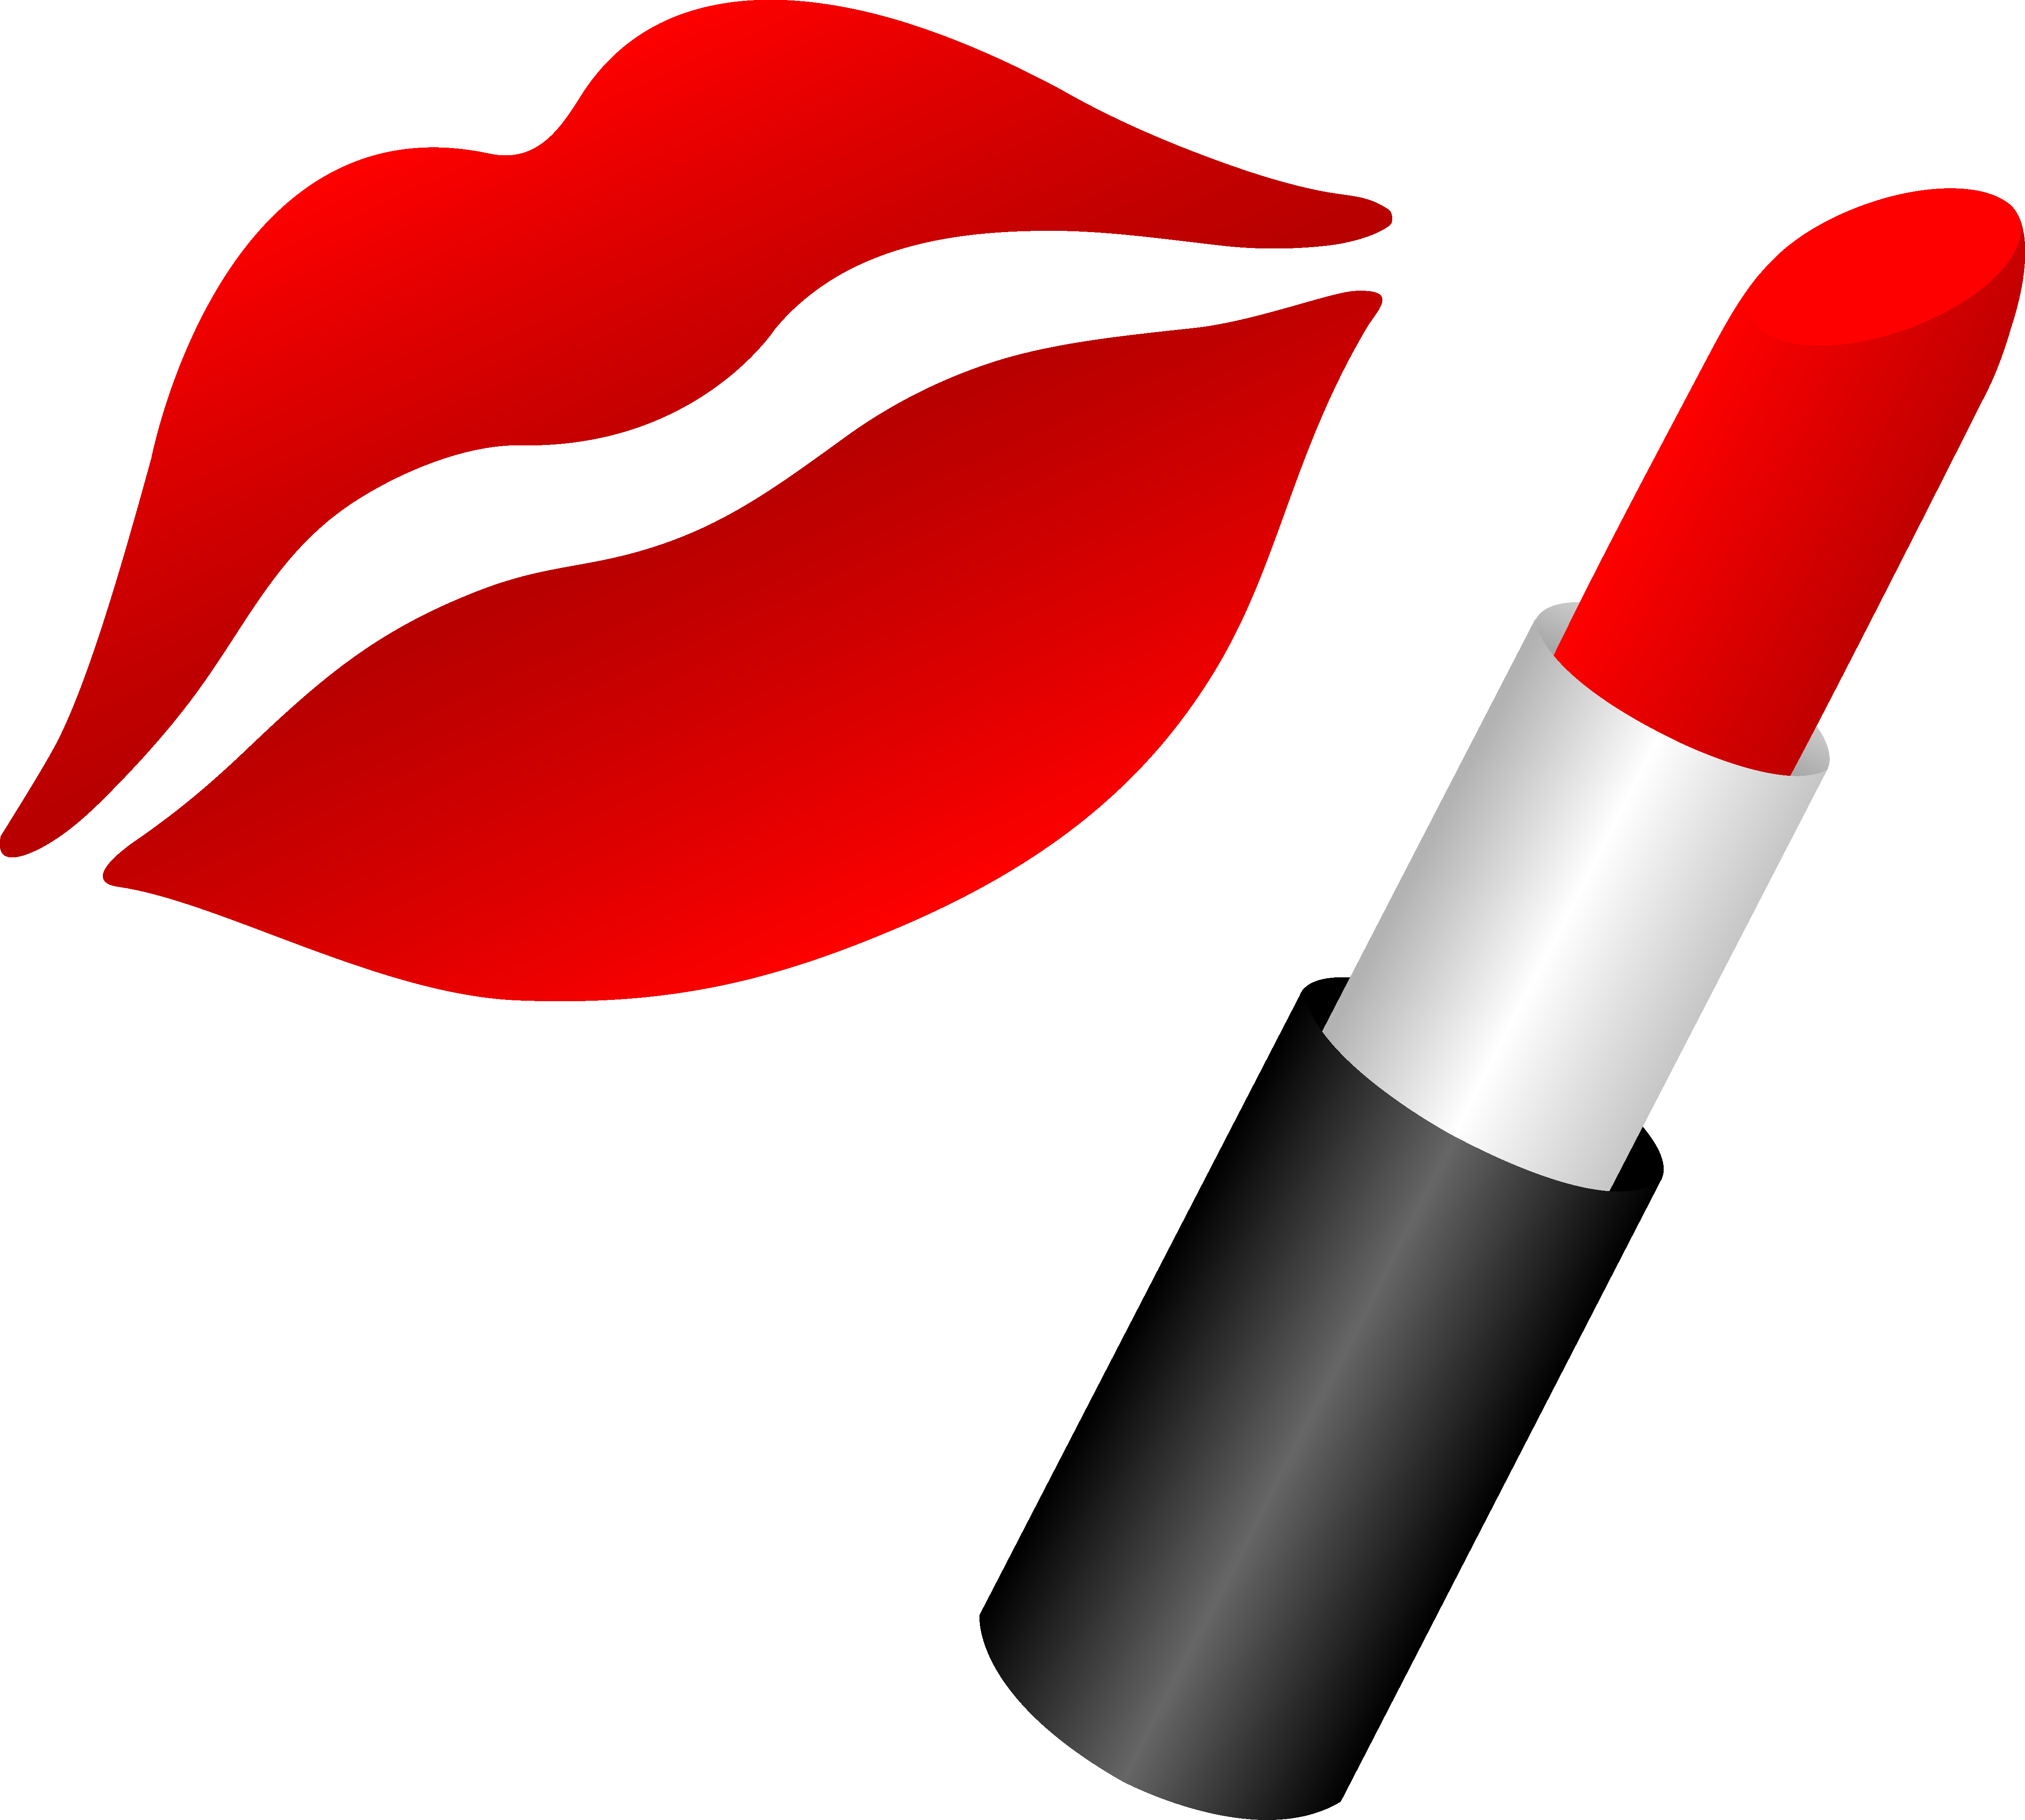 Lips with red lipstick. Win clipart window shades